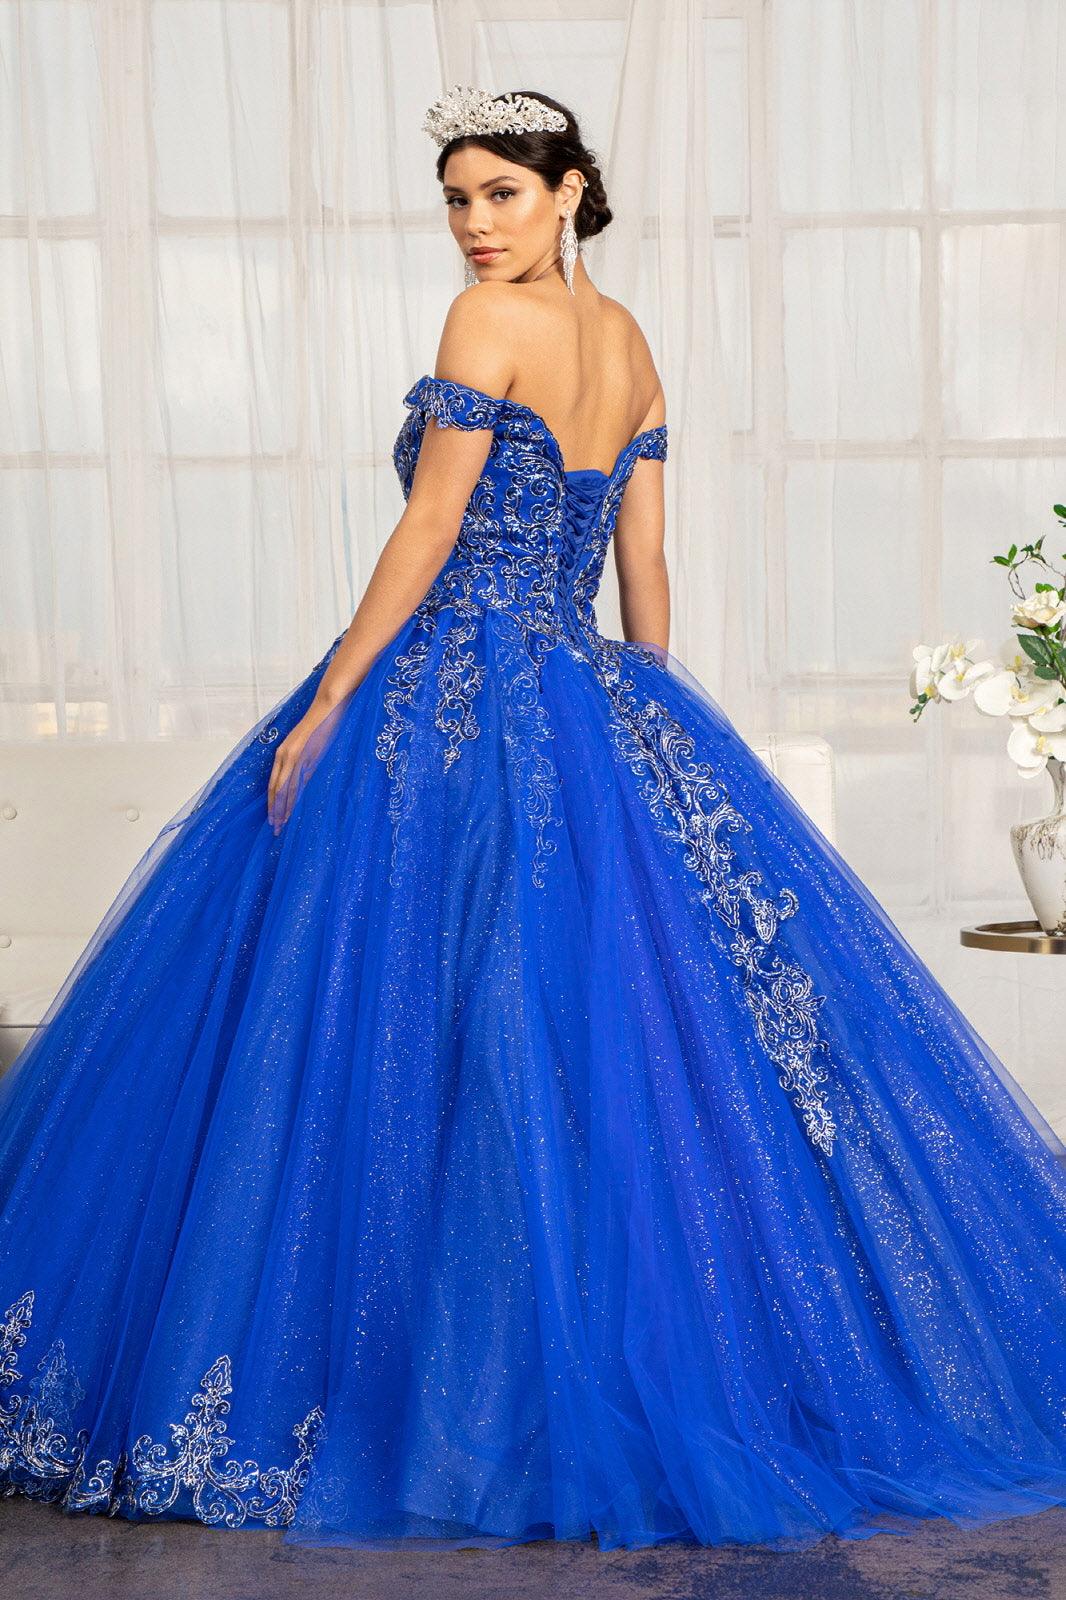 Royal Blue Long Quinceanera Dress Off Shoulder Ball Gown for $806.99 ...